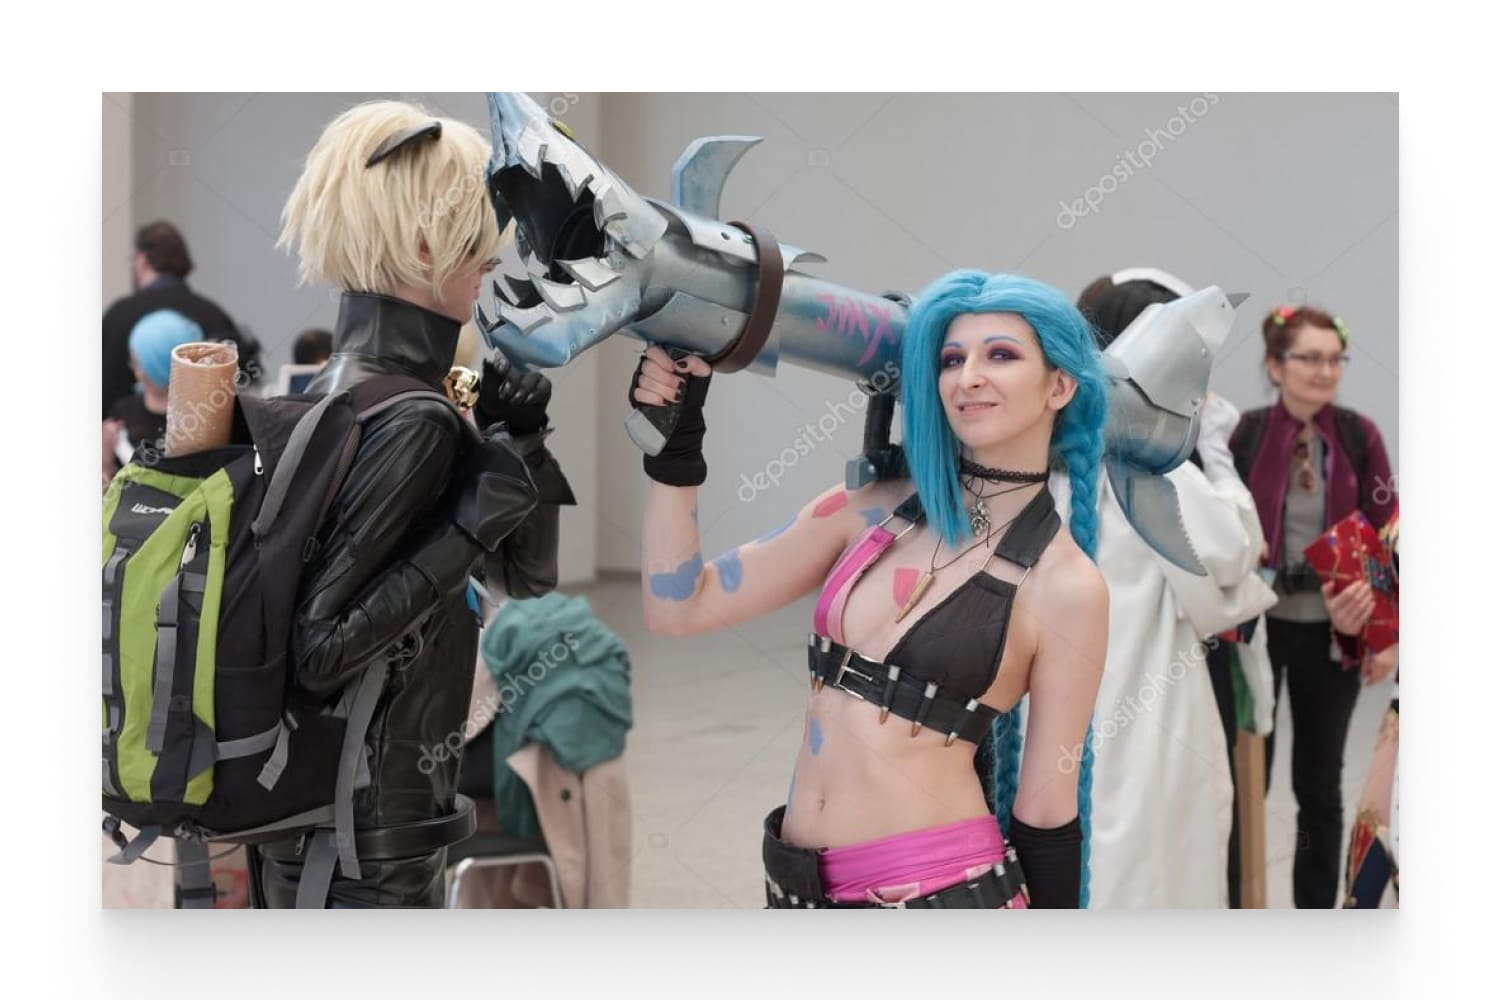 Cosplayer dressed as character Jinx from League of Legends.